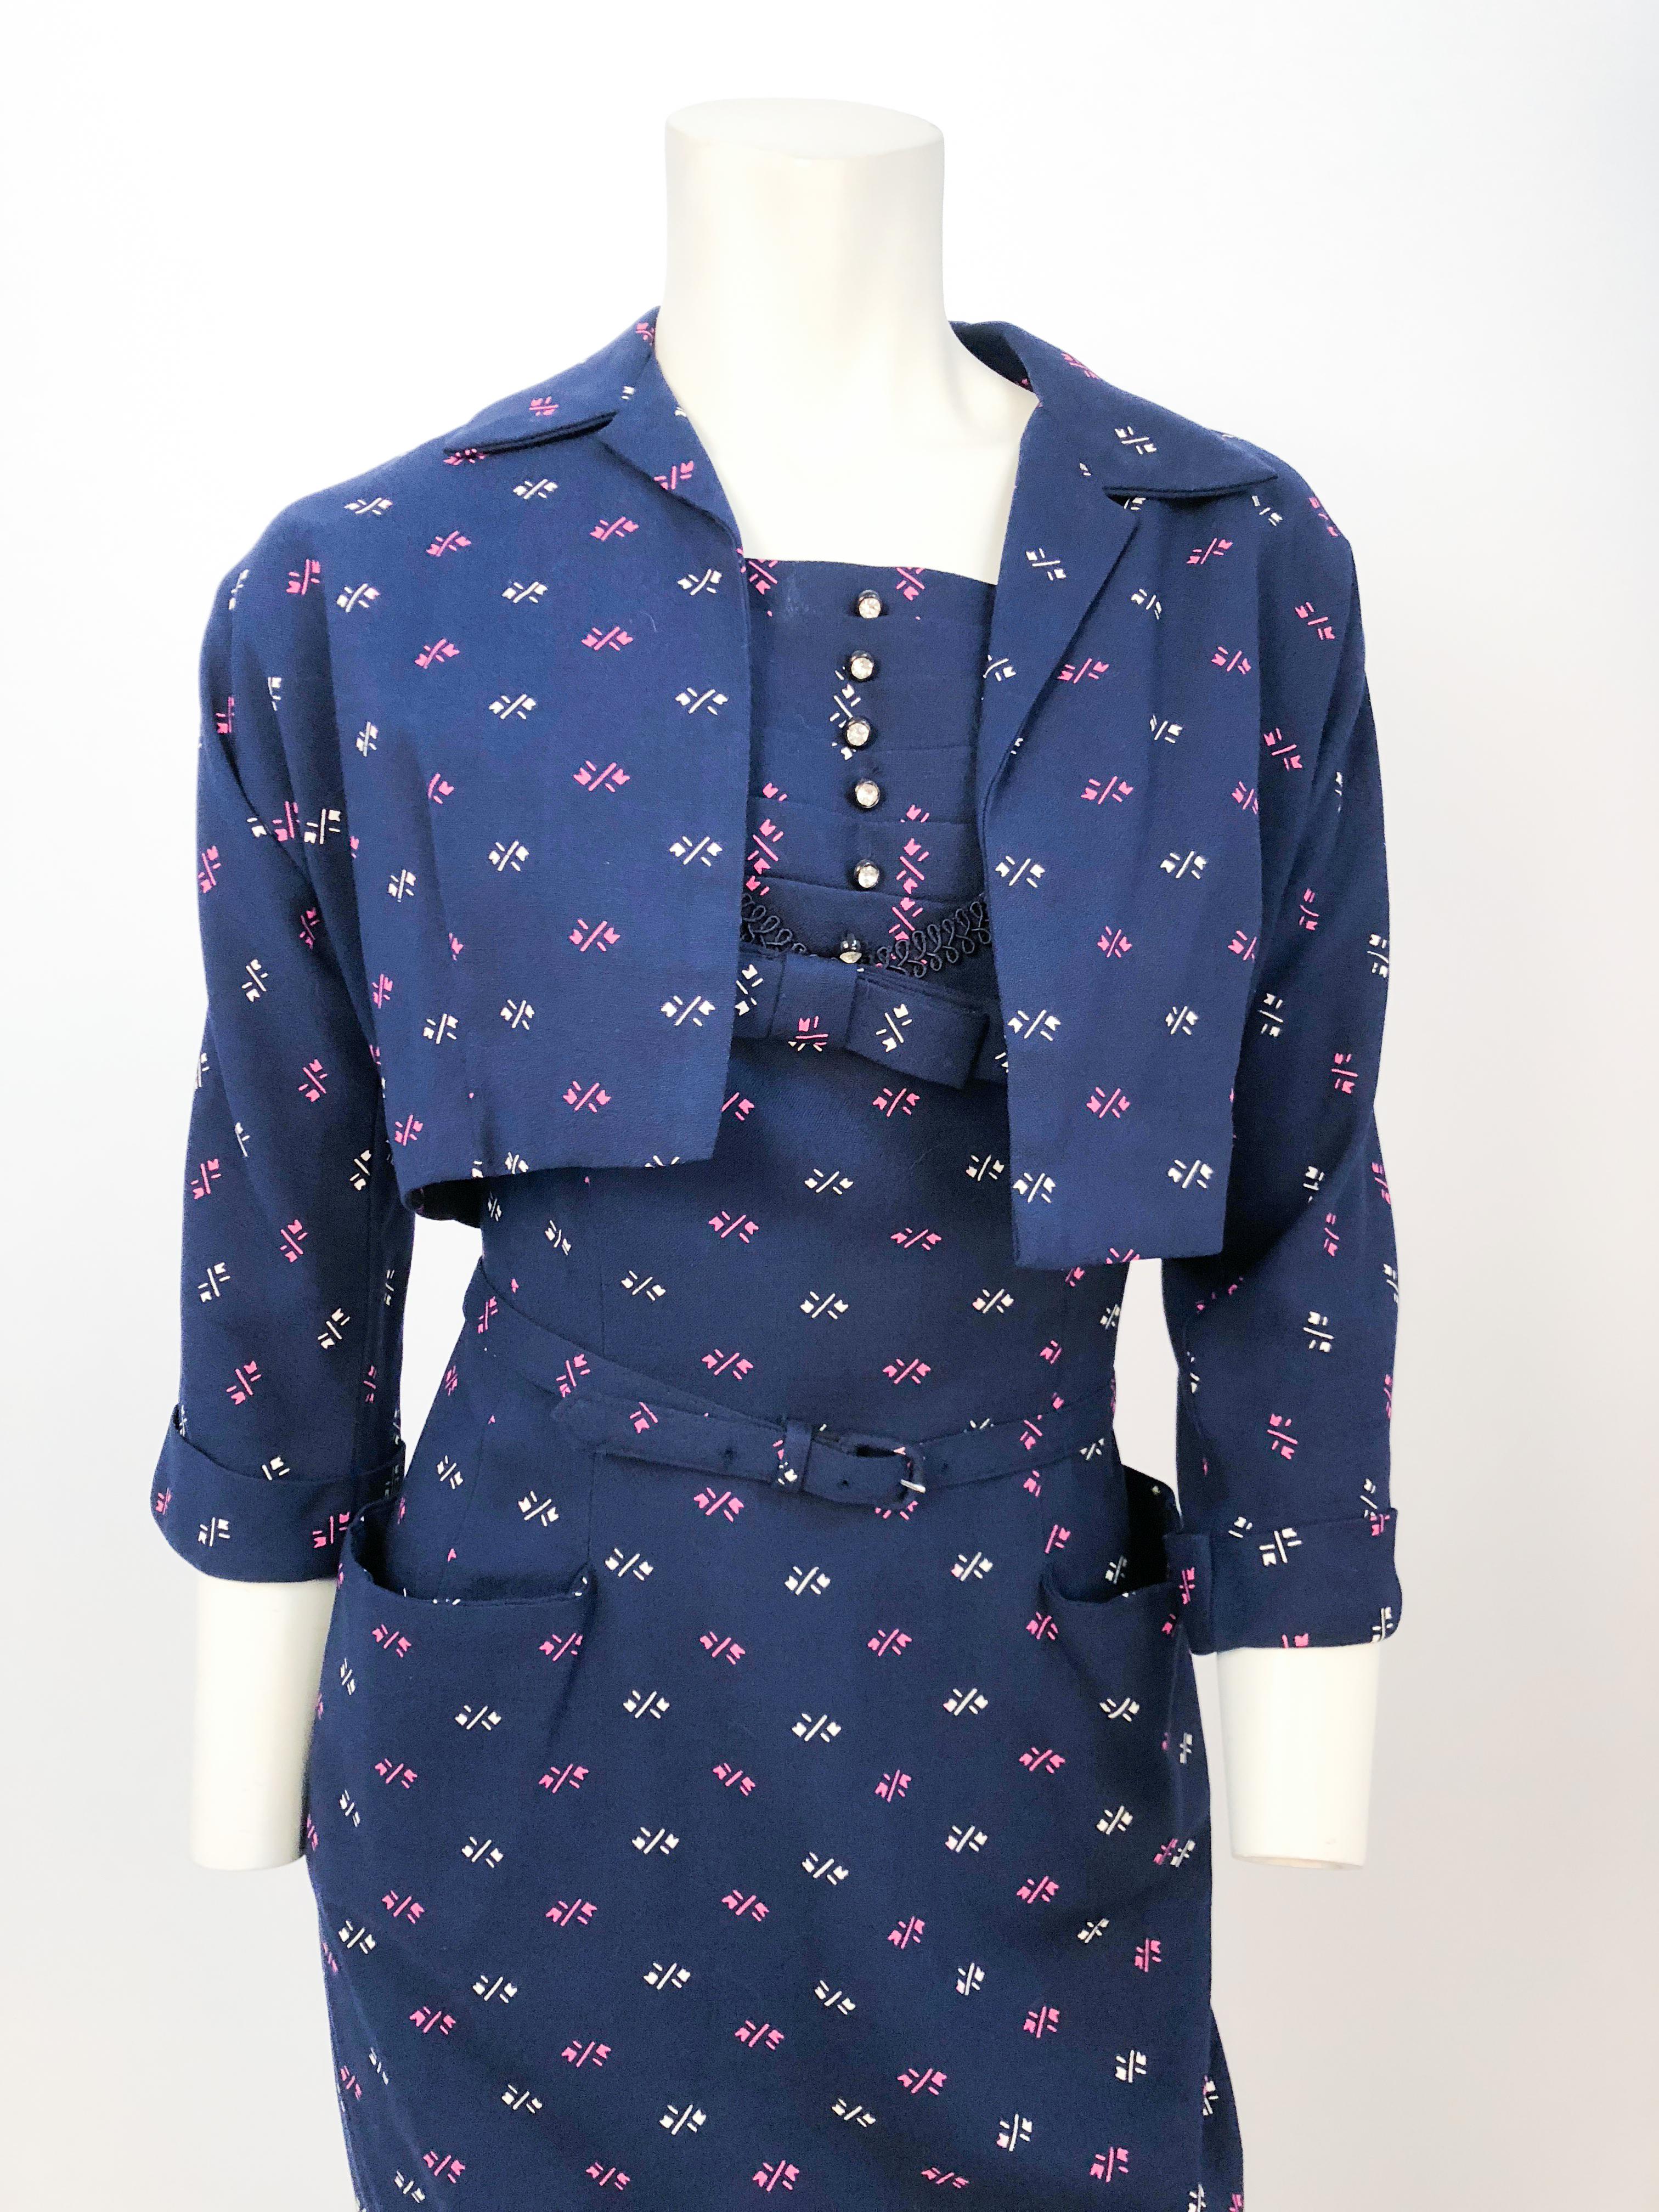 1950s navy printed 3-piece set (Bolero, dress, and belt) with oversized pockets, rhinestone buttons, bow, decorated bib wit pleats, trimming and 3/4 length sleeves.